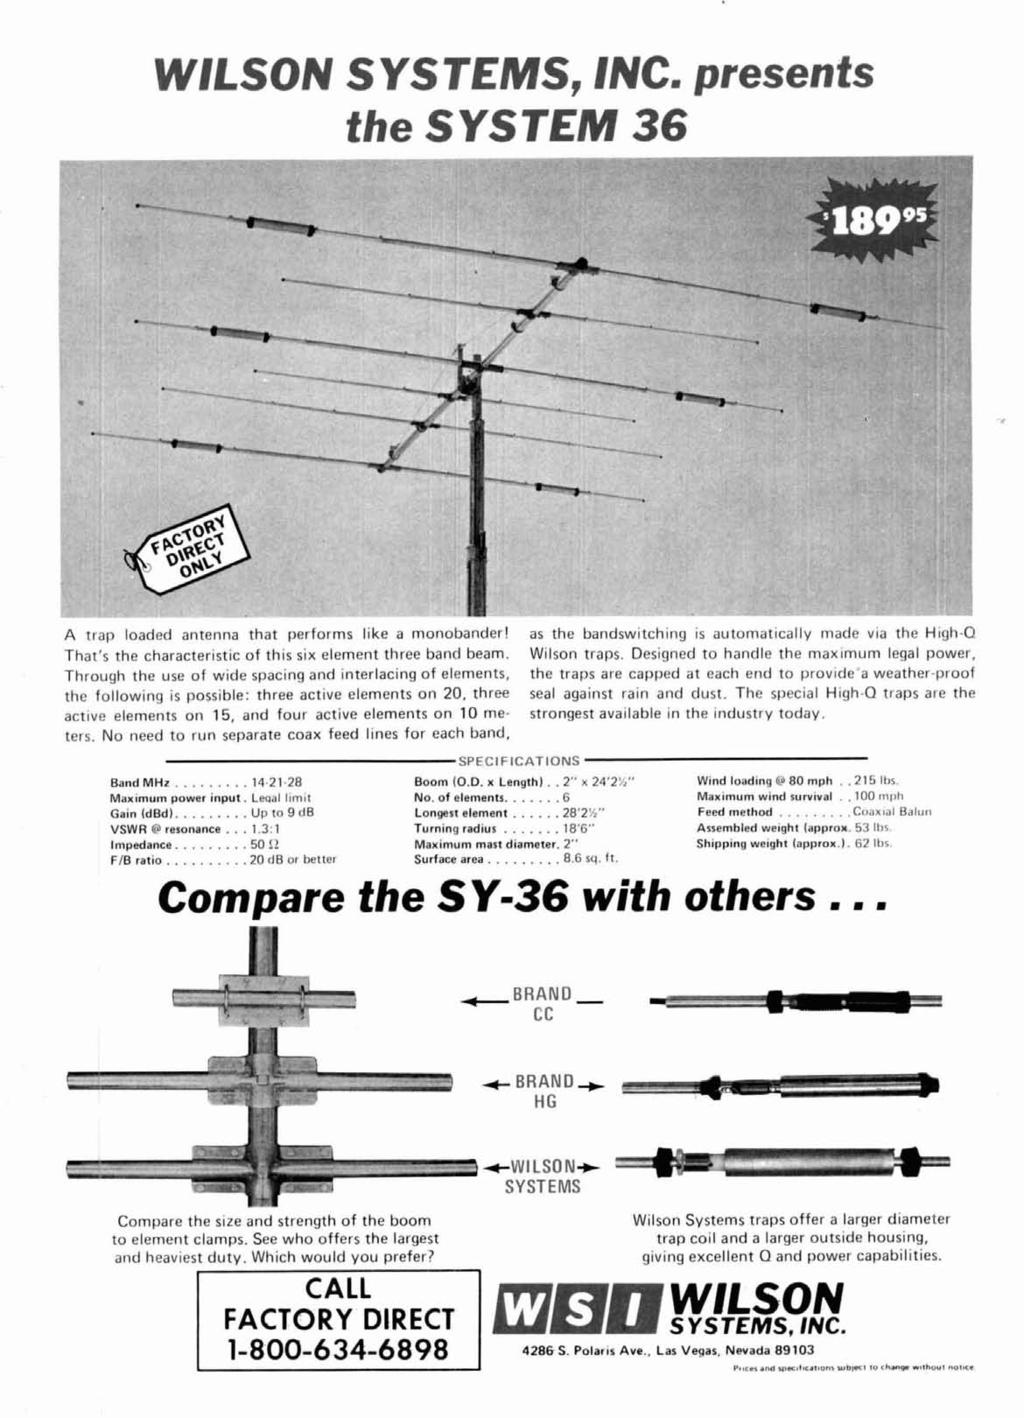 ..5..,-..,r - WILSON SYSTEMS, INC. presents the SYSTEM 36 -rr r* I T ' IICr' A trap loaded antenna that performs like a monobander! That's the characteristic of this six element three band beam.